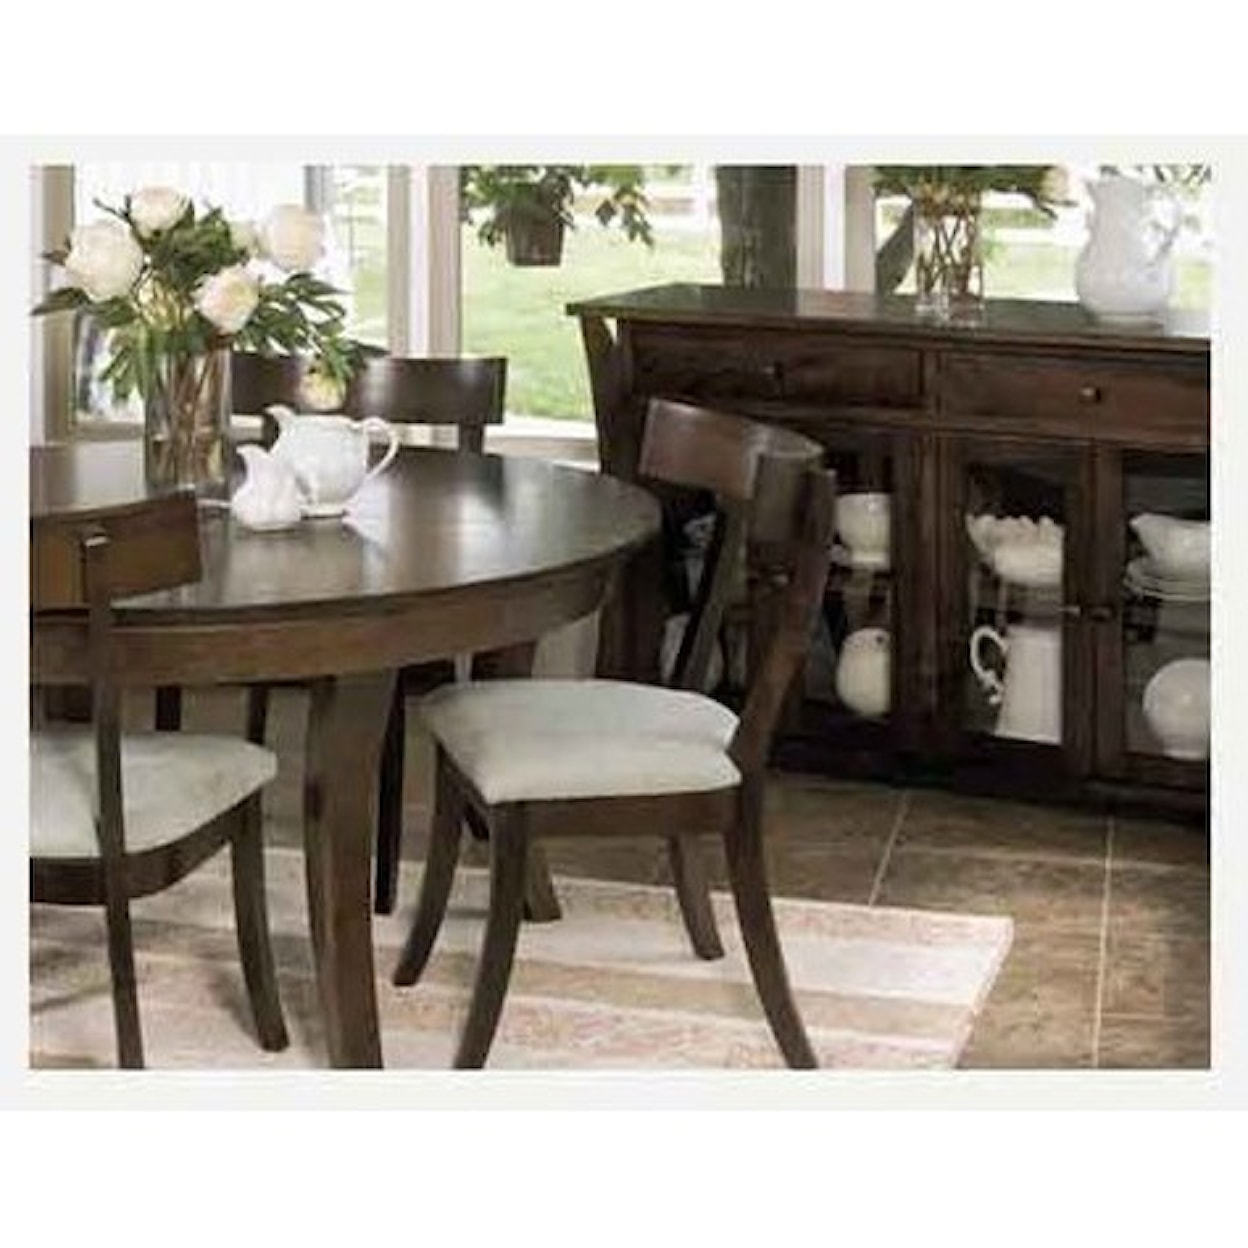 Amish Impressions by Fusion Designs Oasis Customizable Solid Wood Table 60"